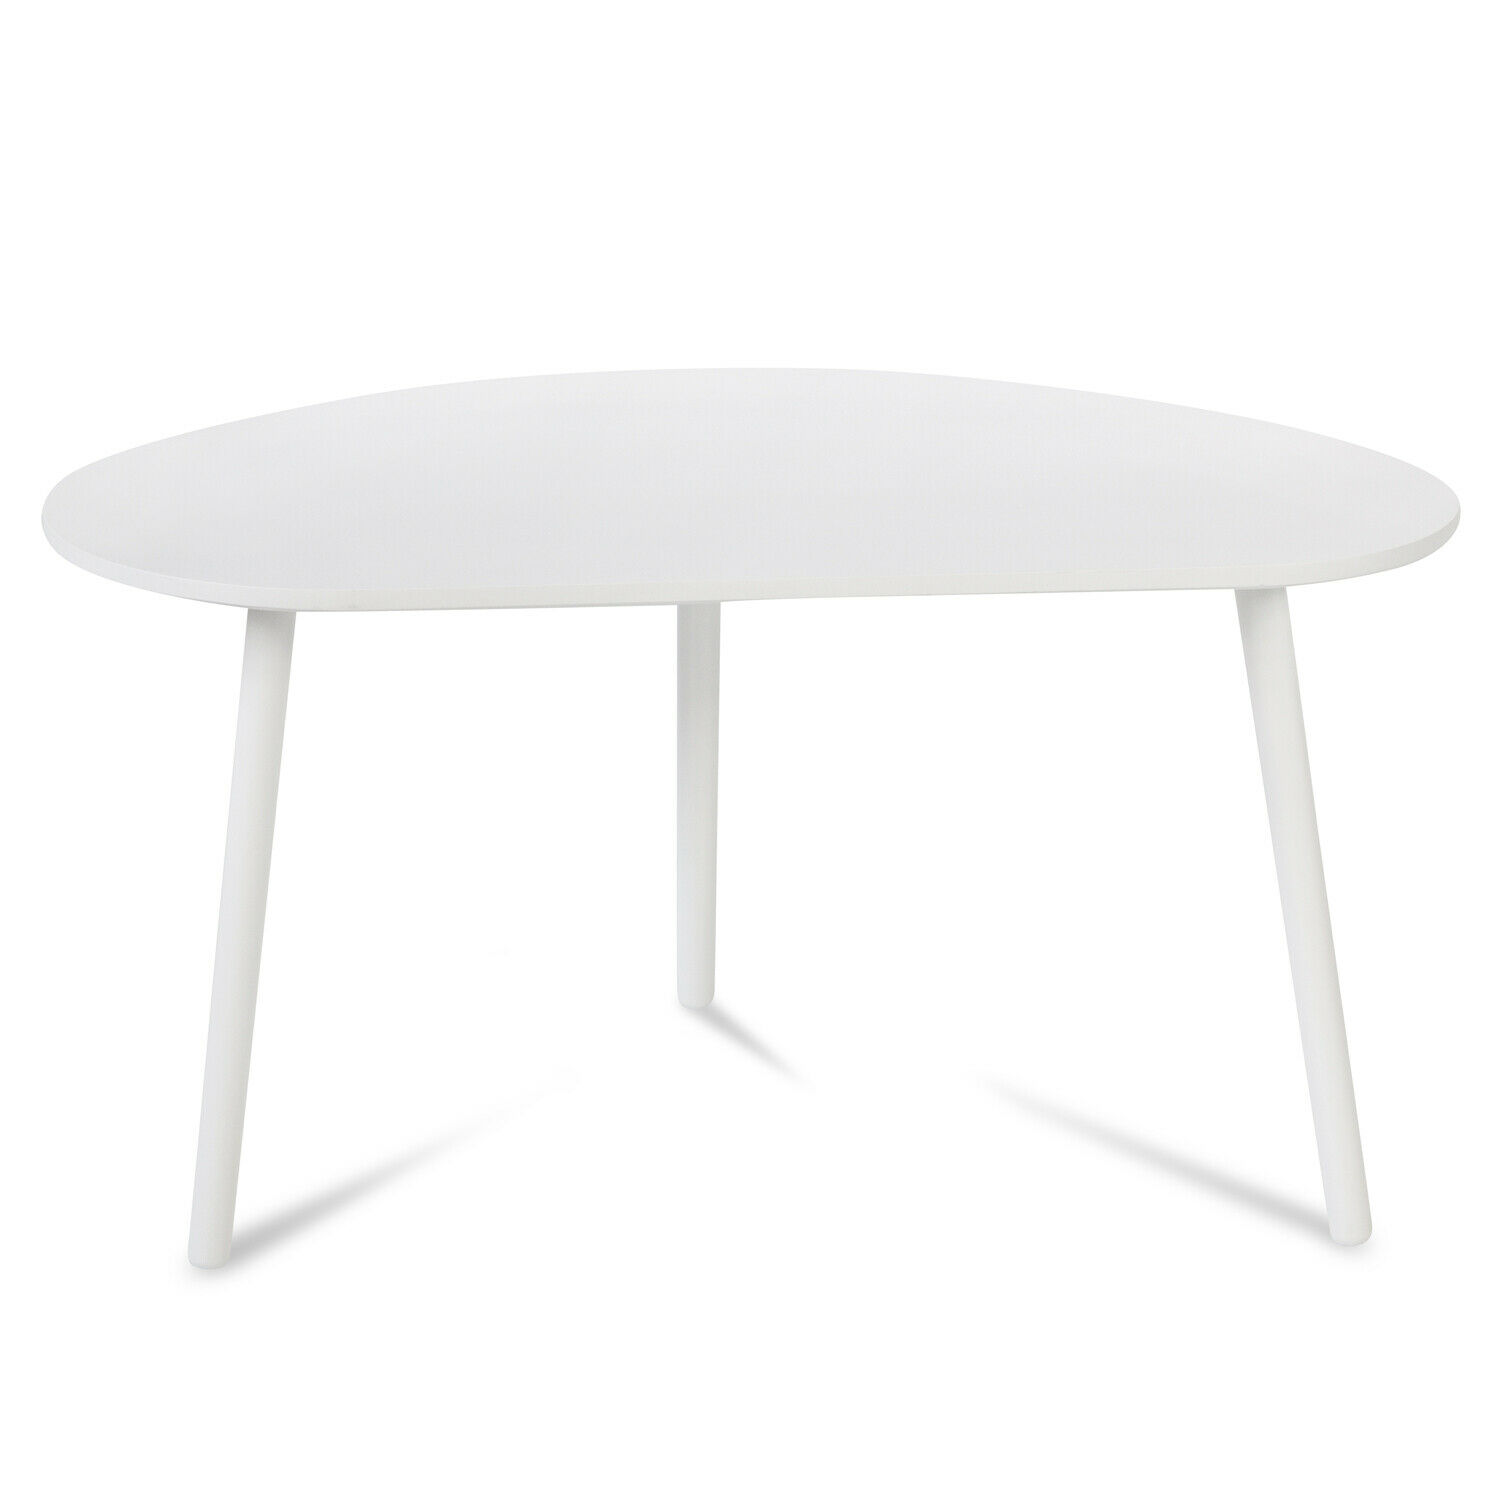 Side Table Occasional Table Coffee Table White Wooden Table Kidney Table Wood